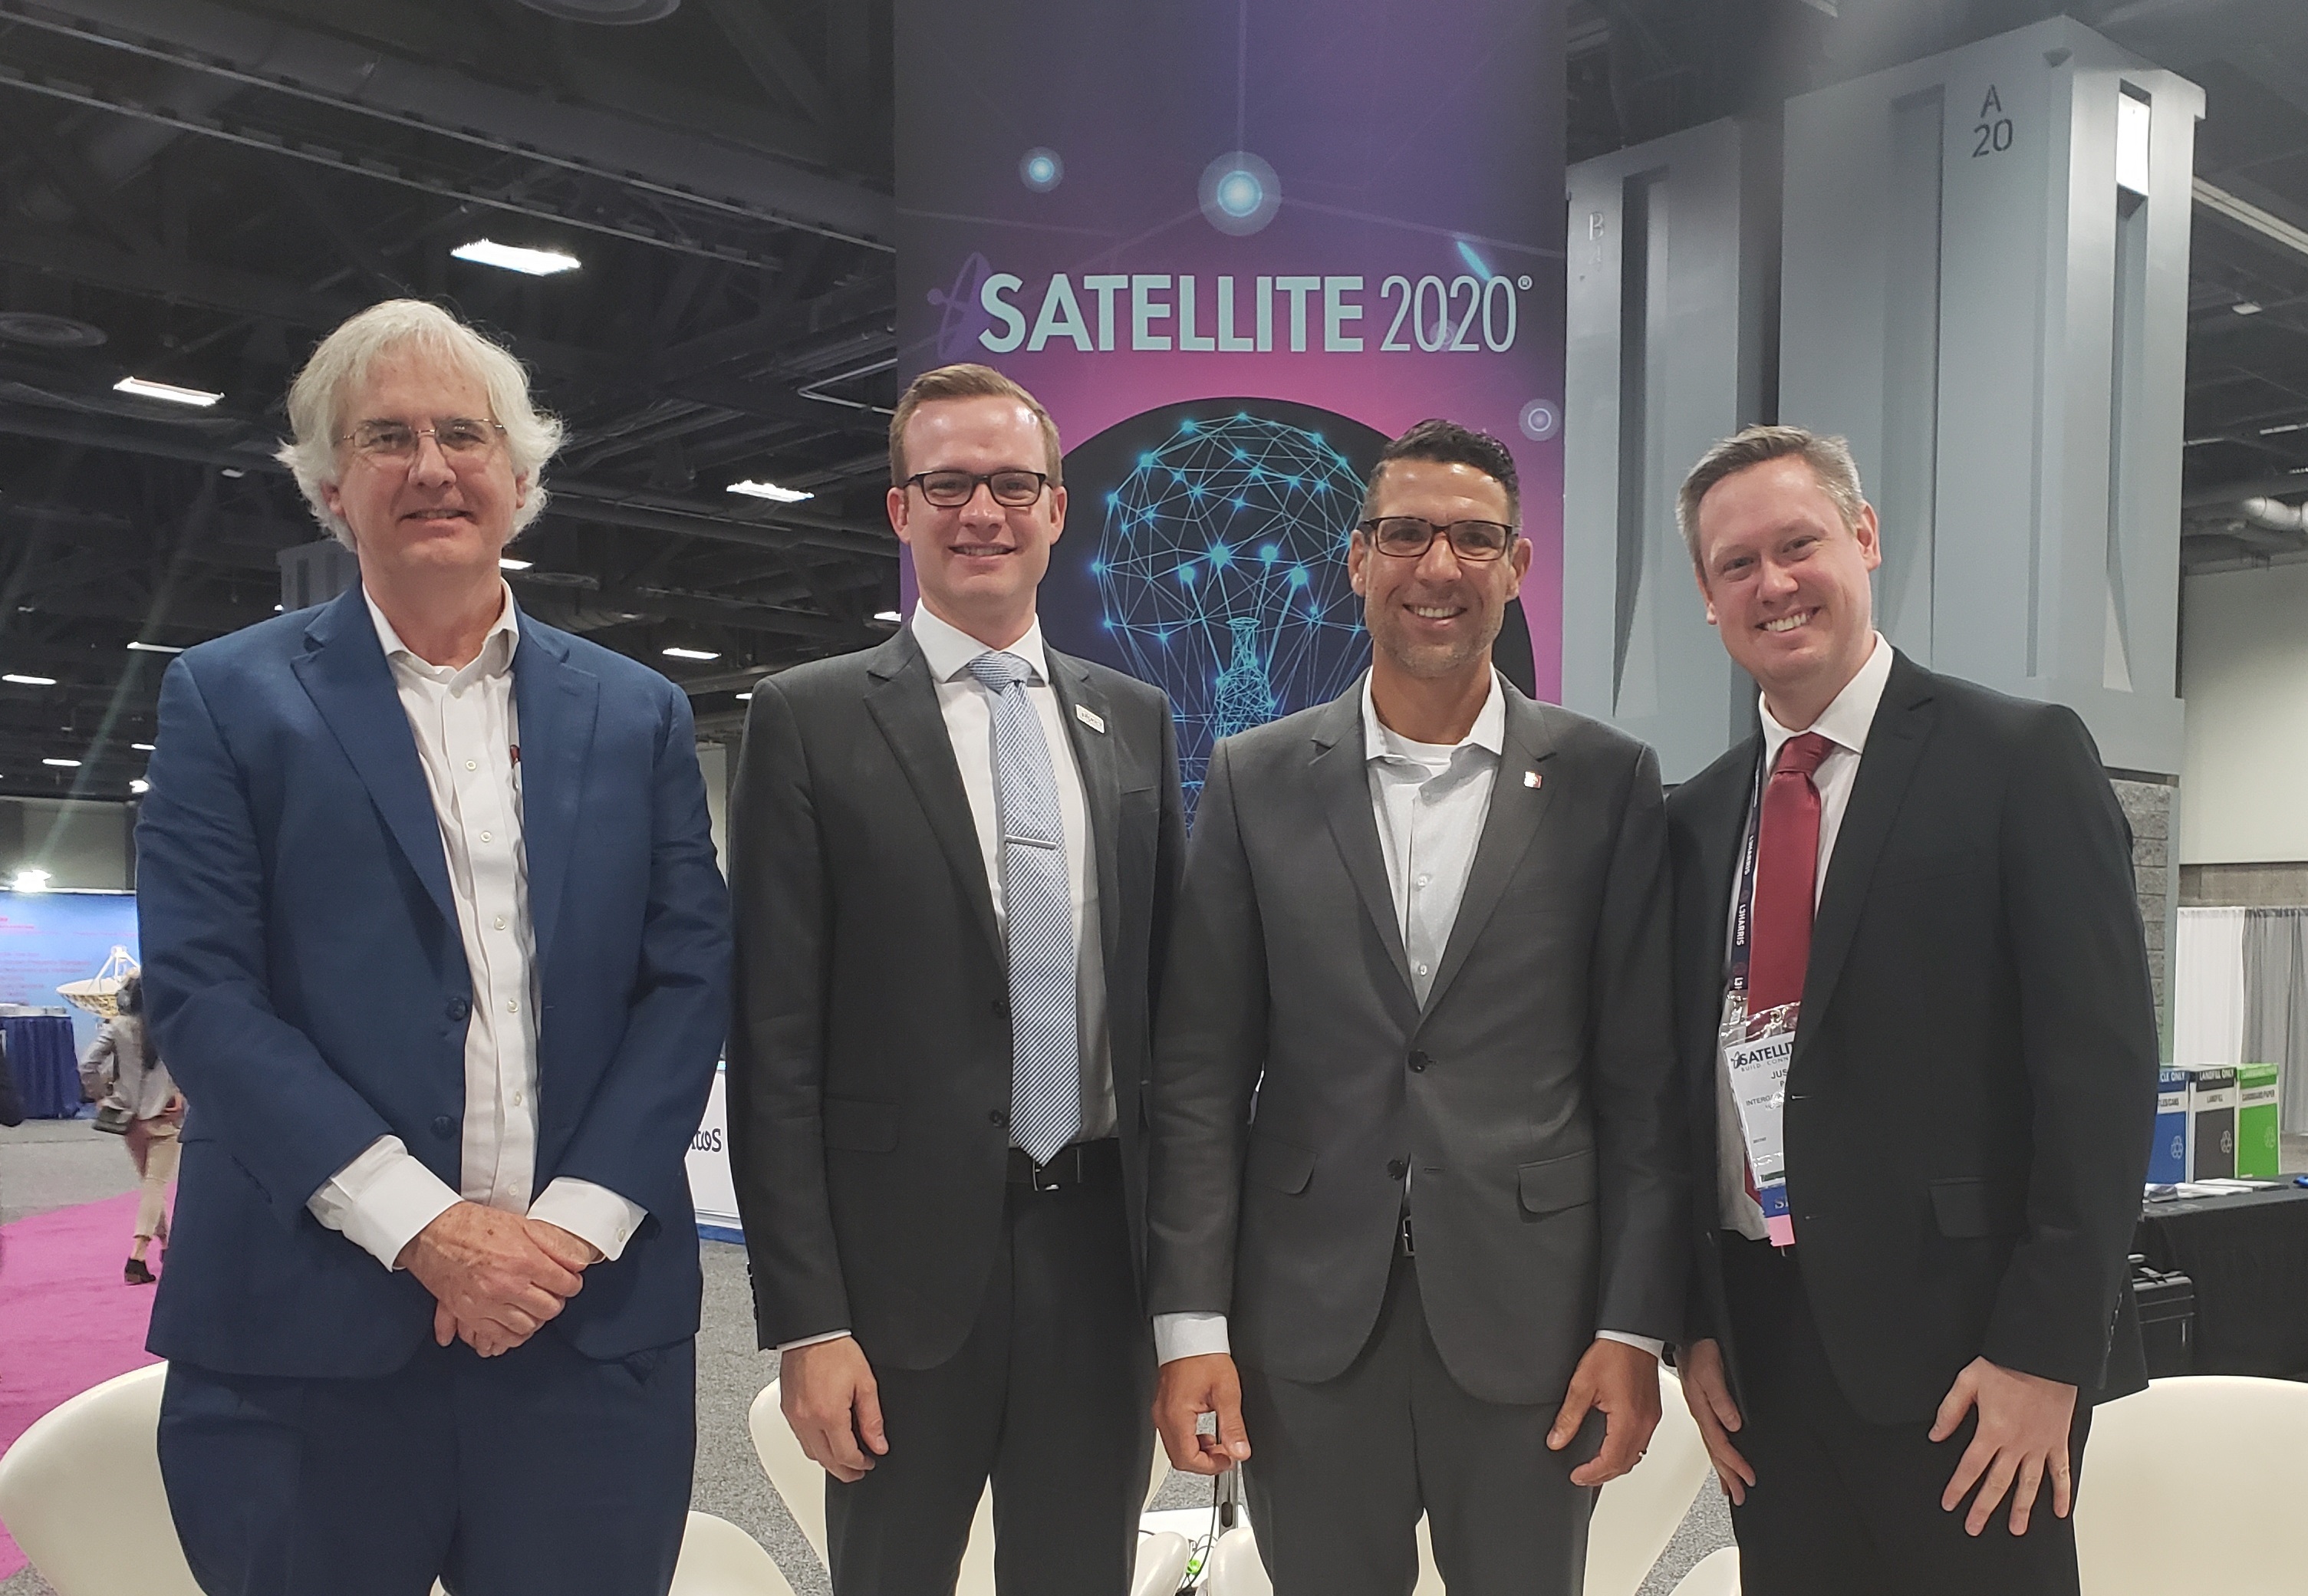 Intergalactic Education's Justin Park at Satellite 2020 Conference